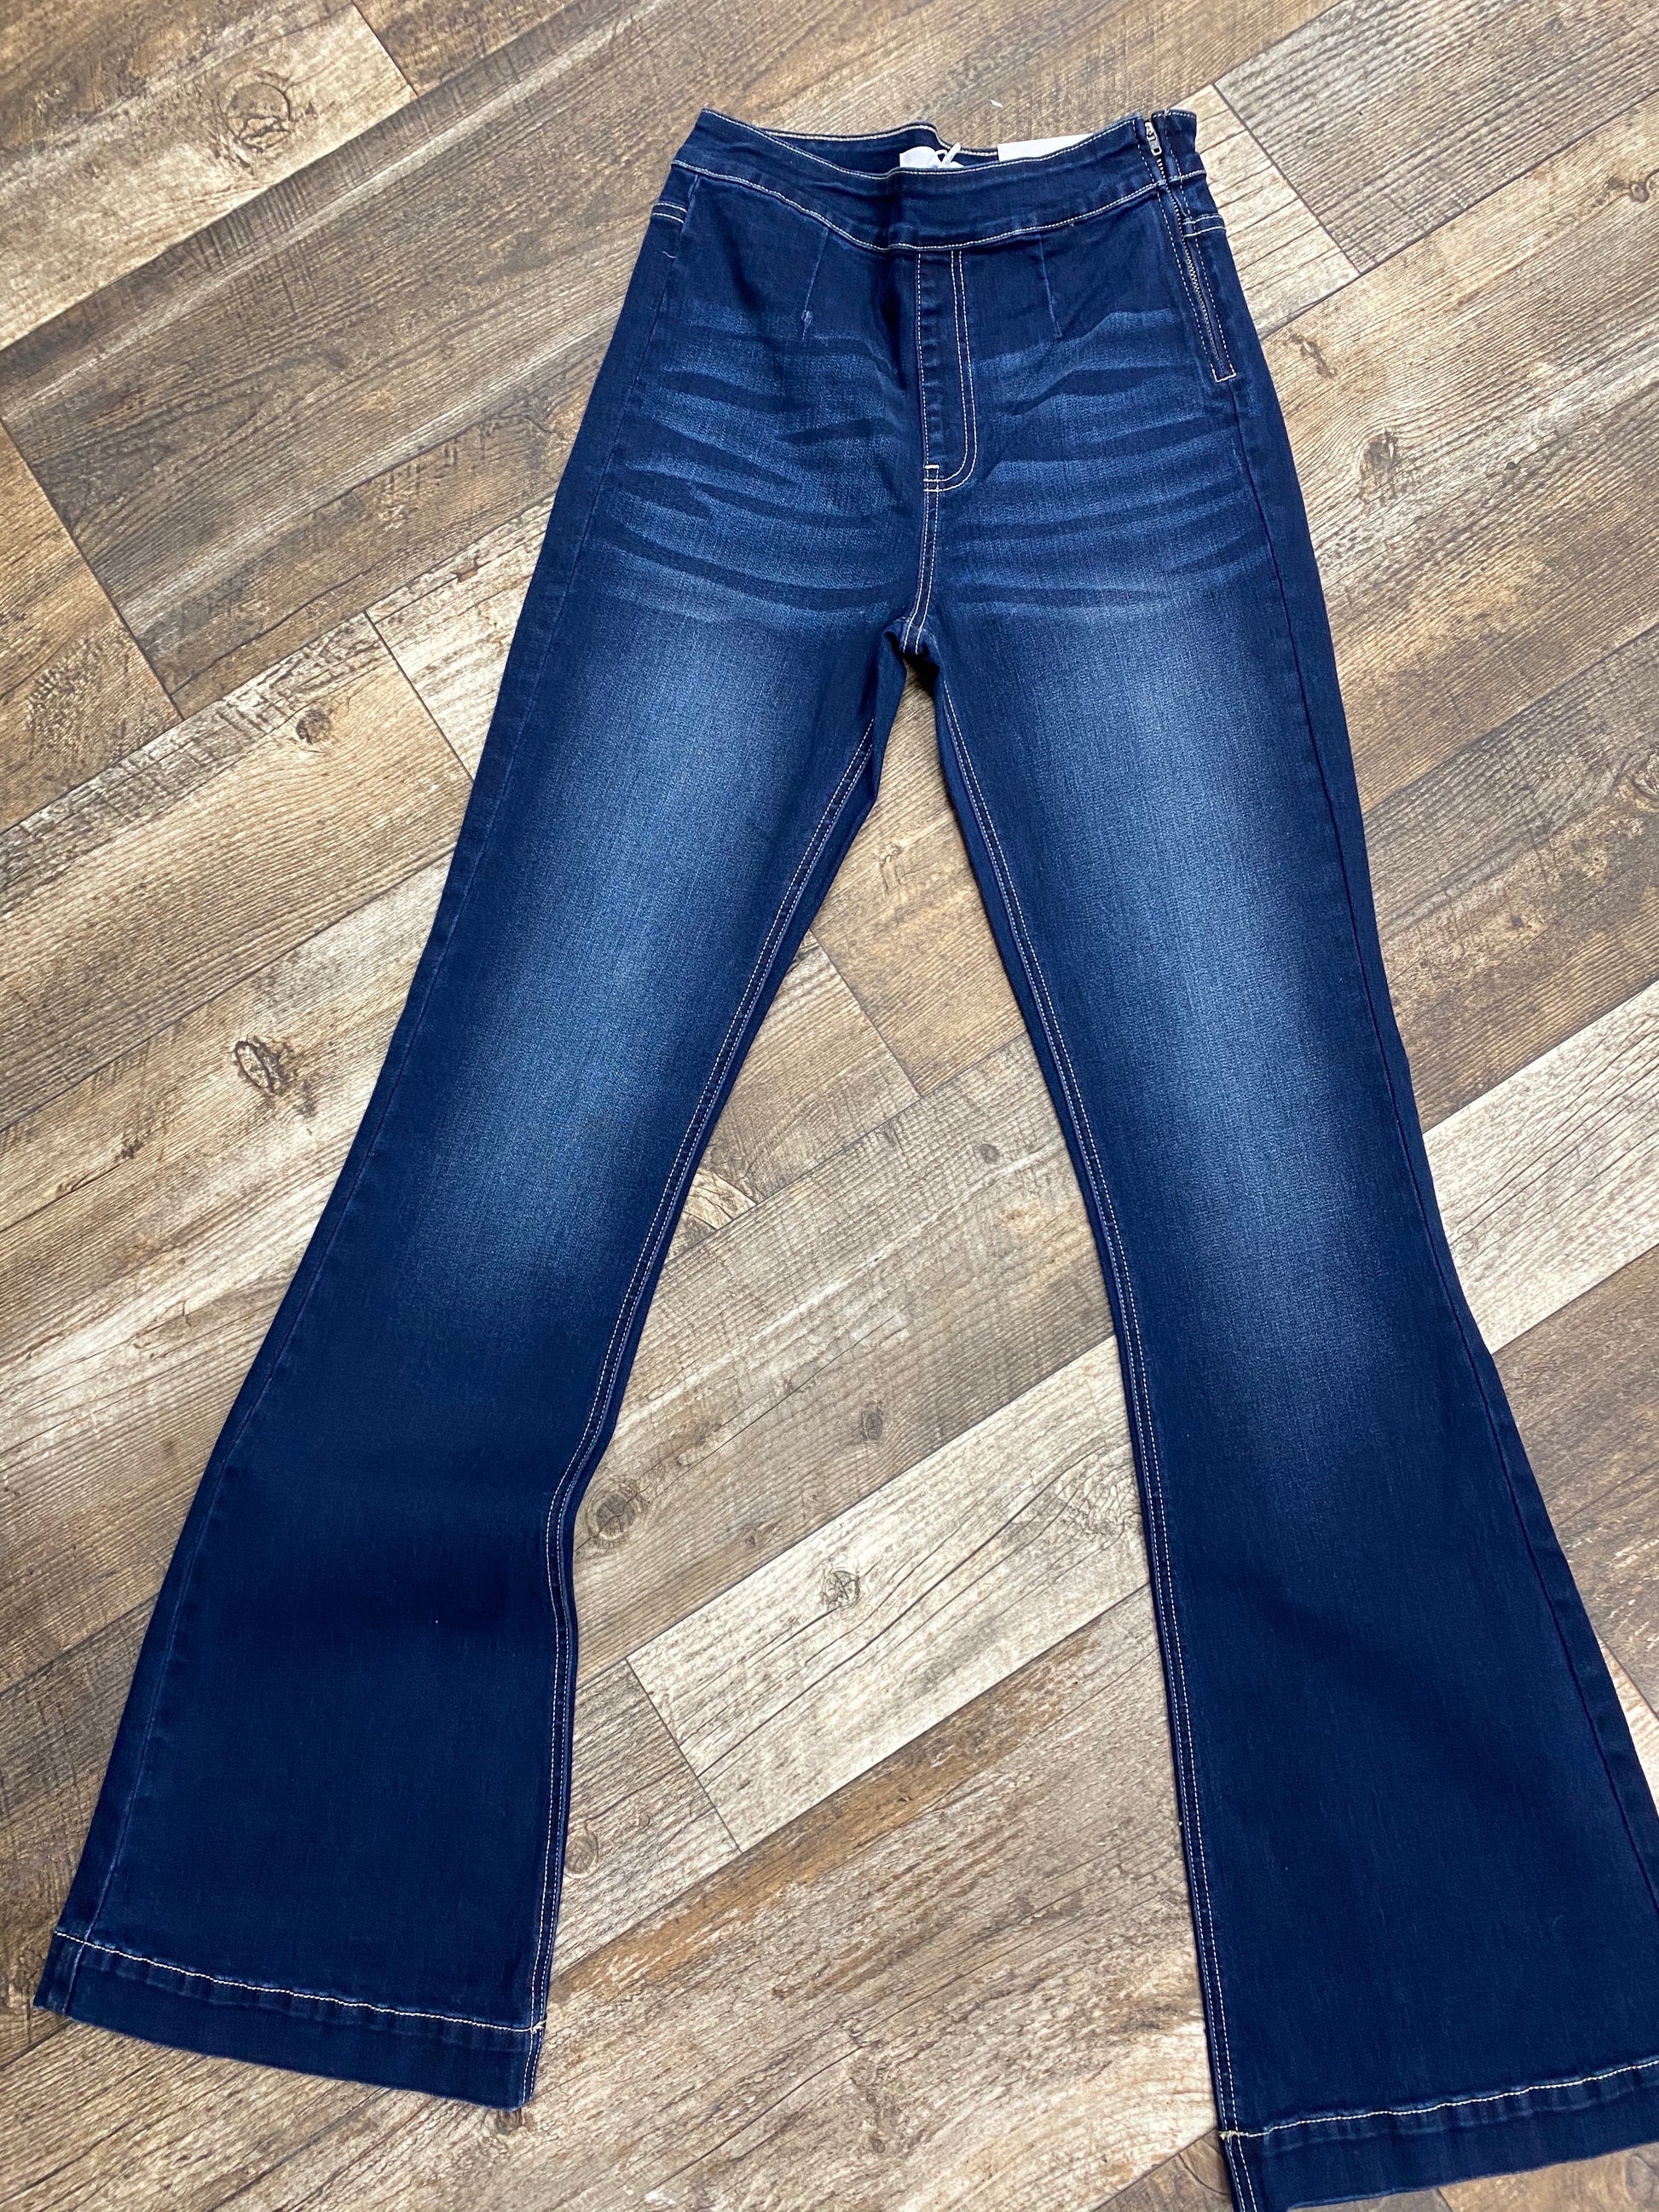 Sale Flared KanCan Jeans Originally $64.99 - Barbed Wire & Lace Boutique 